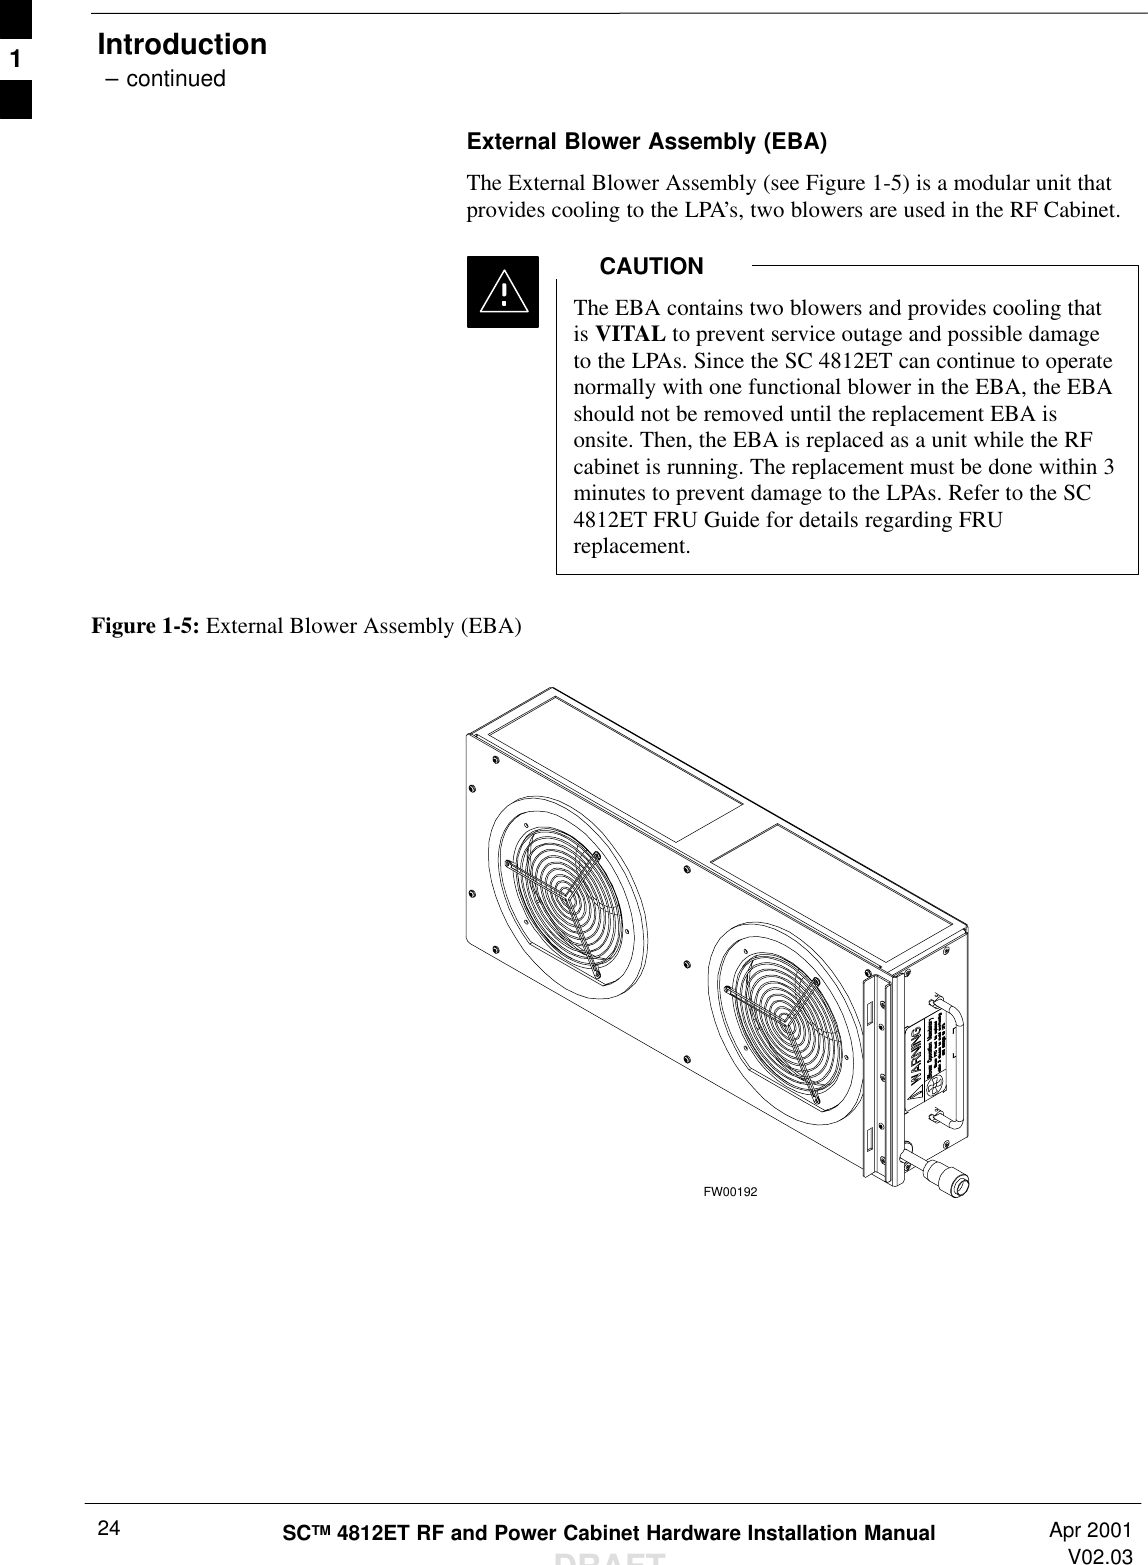 Introduction – continuedSCTM 4812ET RF and Power Cabinet Hardware Installation ManualDRAFTApr 2001V02.0324External Blower Assembly (EBA)The External Blower Assembly (see Figure 1-5) is a modular unit thatprovides cooling to the LPA’s, two blowers are used in the RF Cabinet.The EBA contains two blowers and provides cooling thatis VITAL to prevent service outage and possible damageto the LPAs. Since the SC 4812ET can continue to operatenormally with one functional blower in the EBA, the EBAshould not be removed until the replacement EBA isonsite. Then, the EBA is replaced as a unit while the RFcabinet is running. The replacement must be done within 3minutes to prevent damage to the LPAs. Refer to the SC4812ET FRU Guide for details regarding FRUreplacement.CAUTIONFigure 1-5: External Blower Assembly (EBA)FW001921